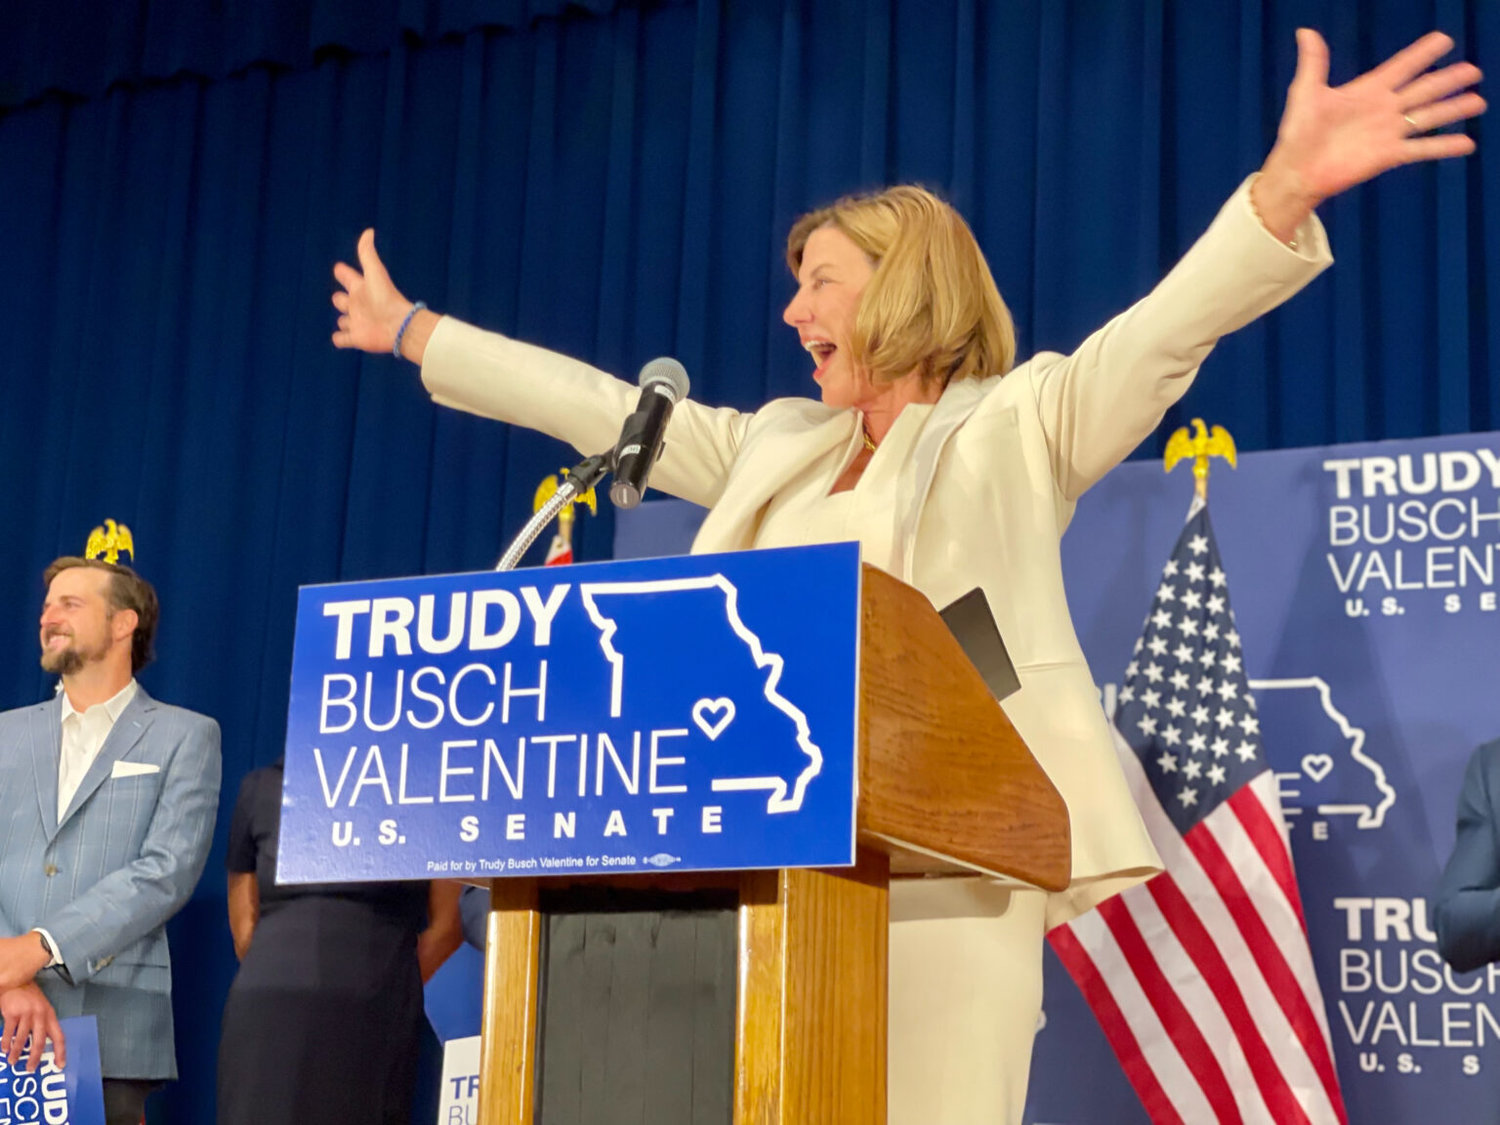 Trudy Busch Valentine emerged victorious in the Democratic primary for U.S. Senate Aug. 2. Valentine was also favored by Chariton County Democrats.